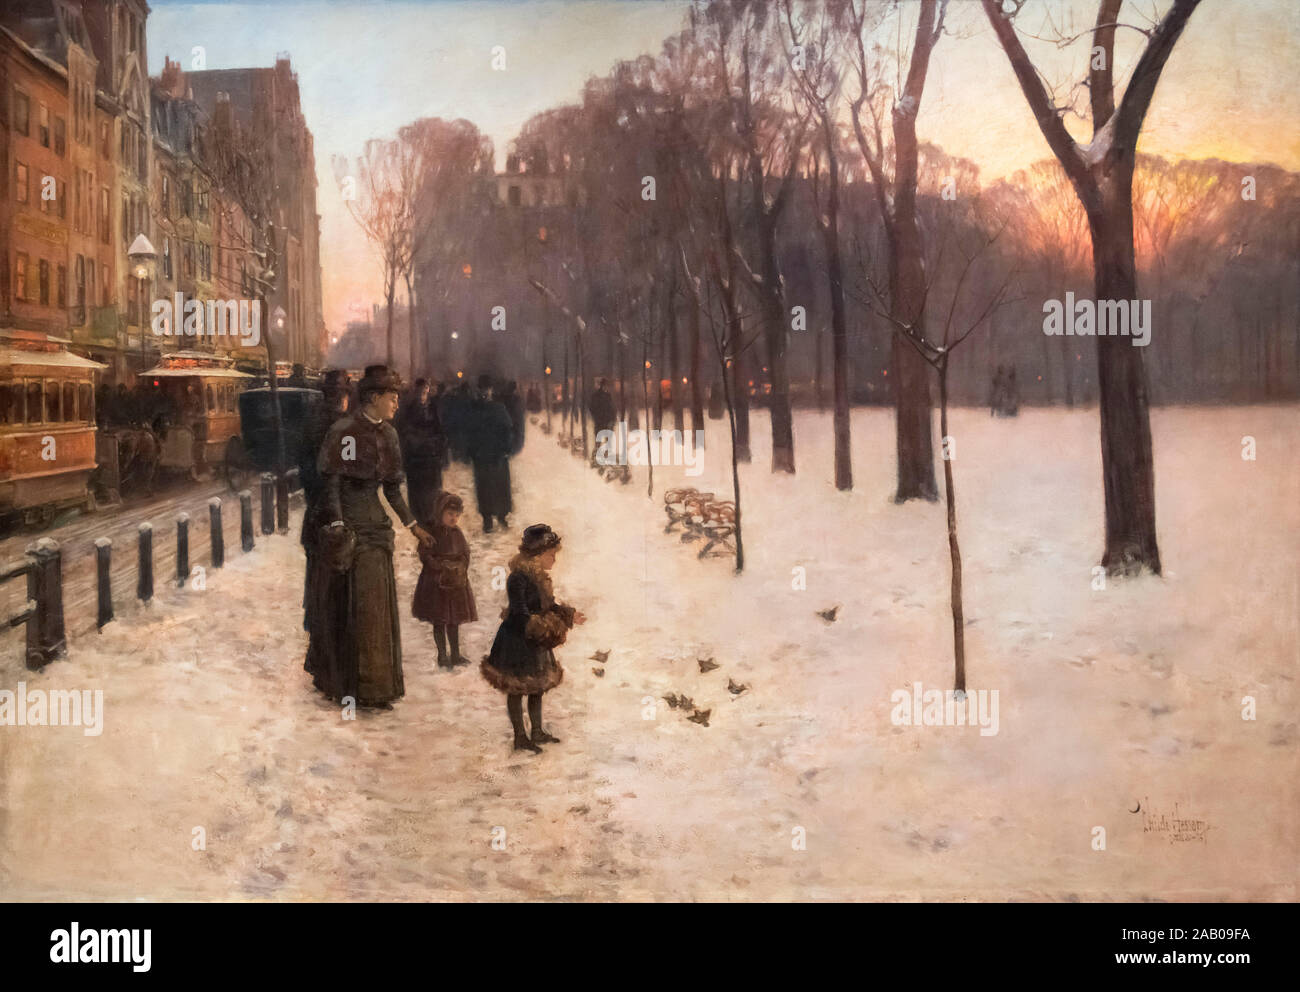 At Dusk (Boston Common at Twilight) by Childe Hassam (1859-1935), oil on canvas, 1885/6 Stock Photo